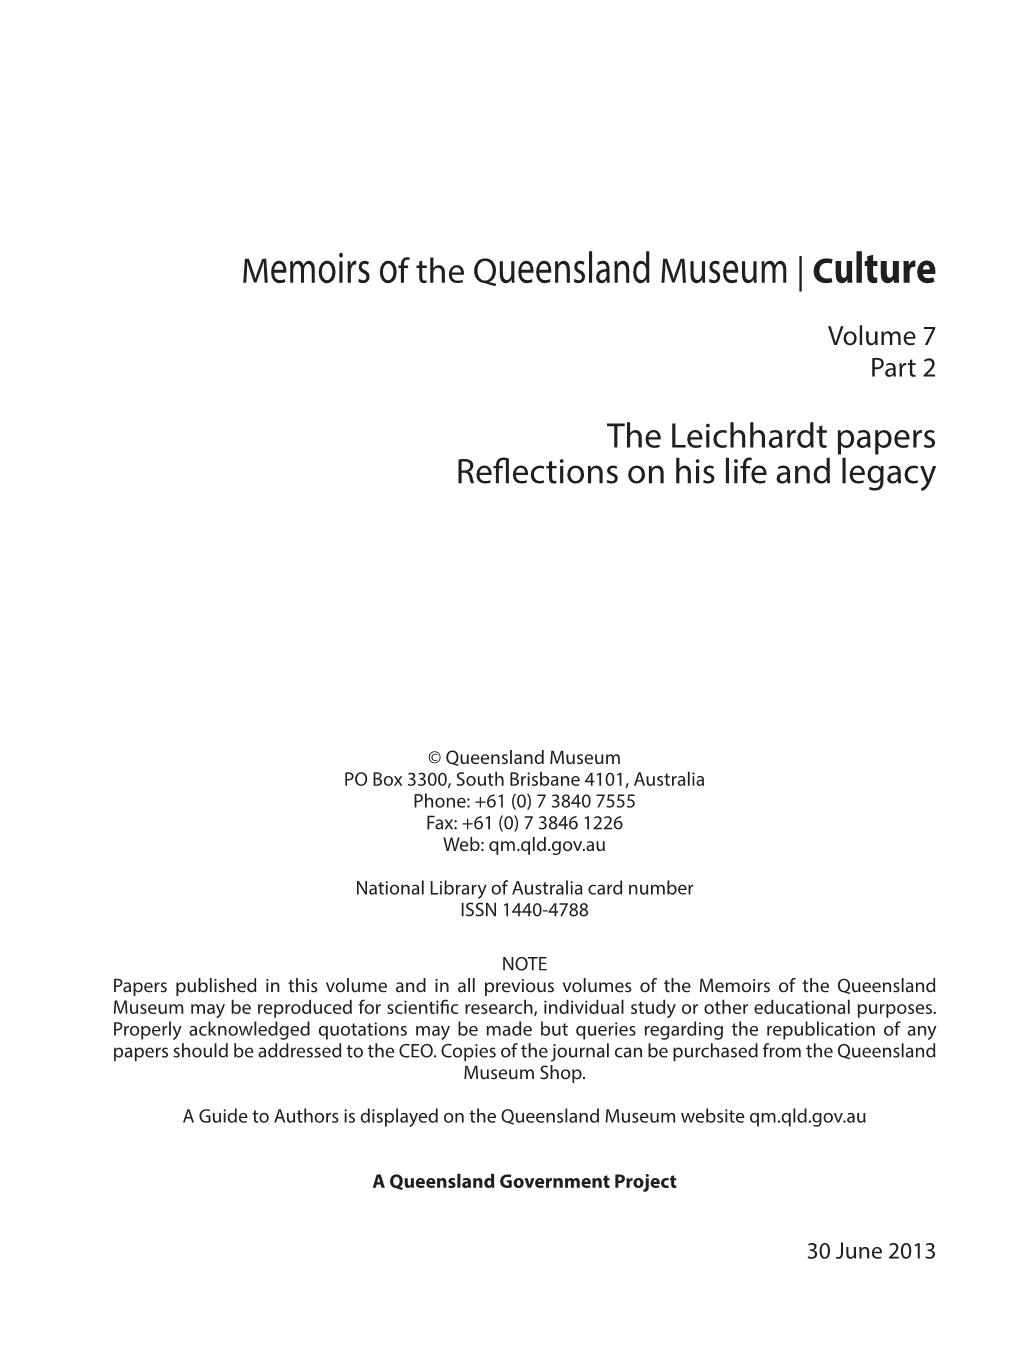 The Young Leichhardt's Diaries in the Context of His Australian Cultural